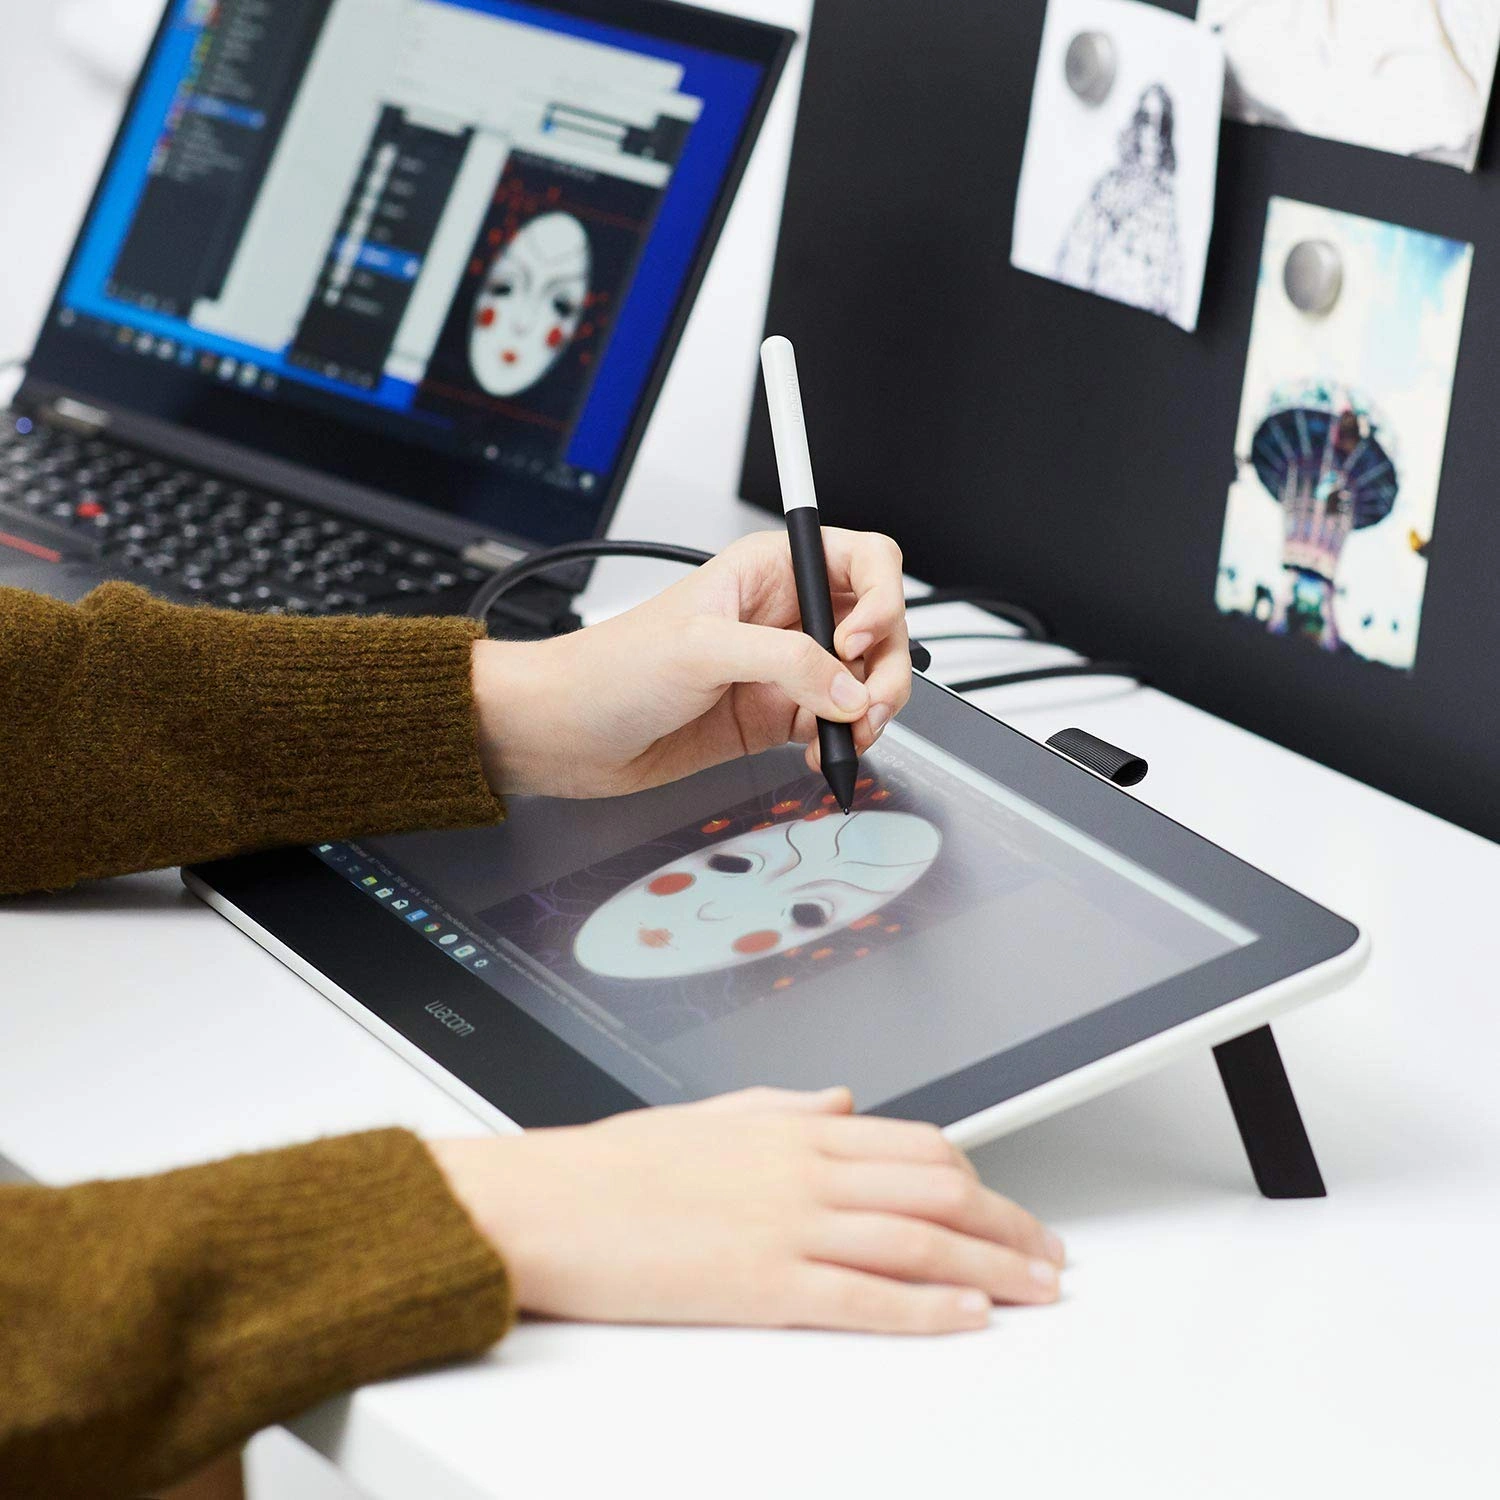 Wacom Bamboo Spark lets you save handwritten paper notes digitally in cloud   Times of India